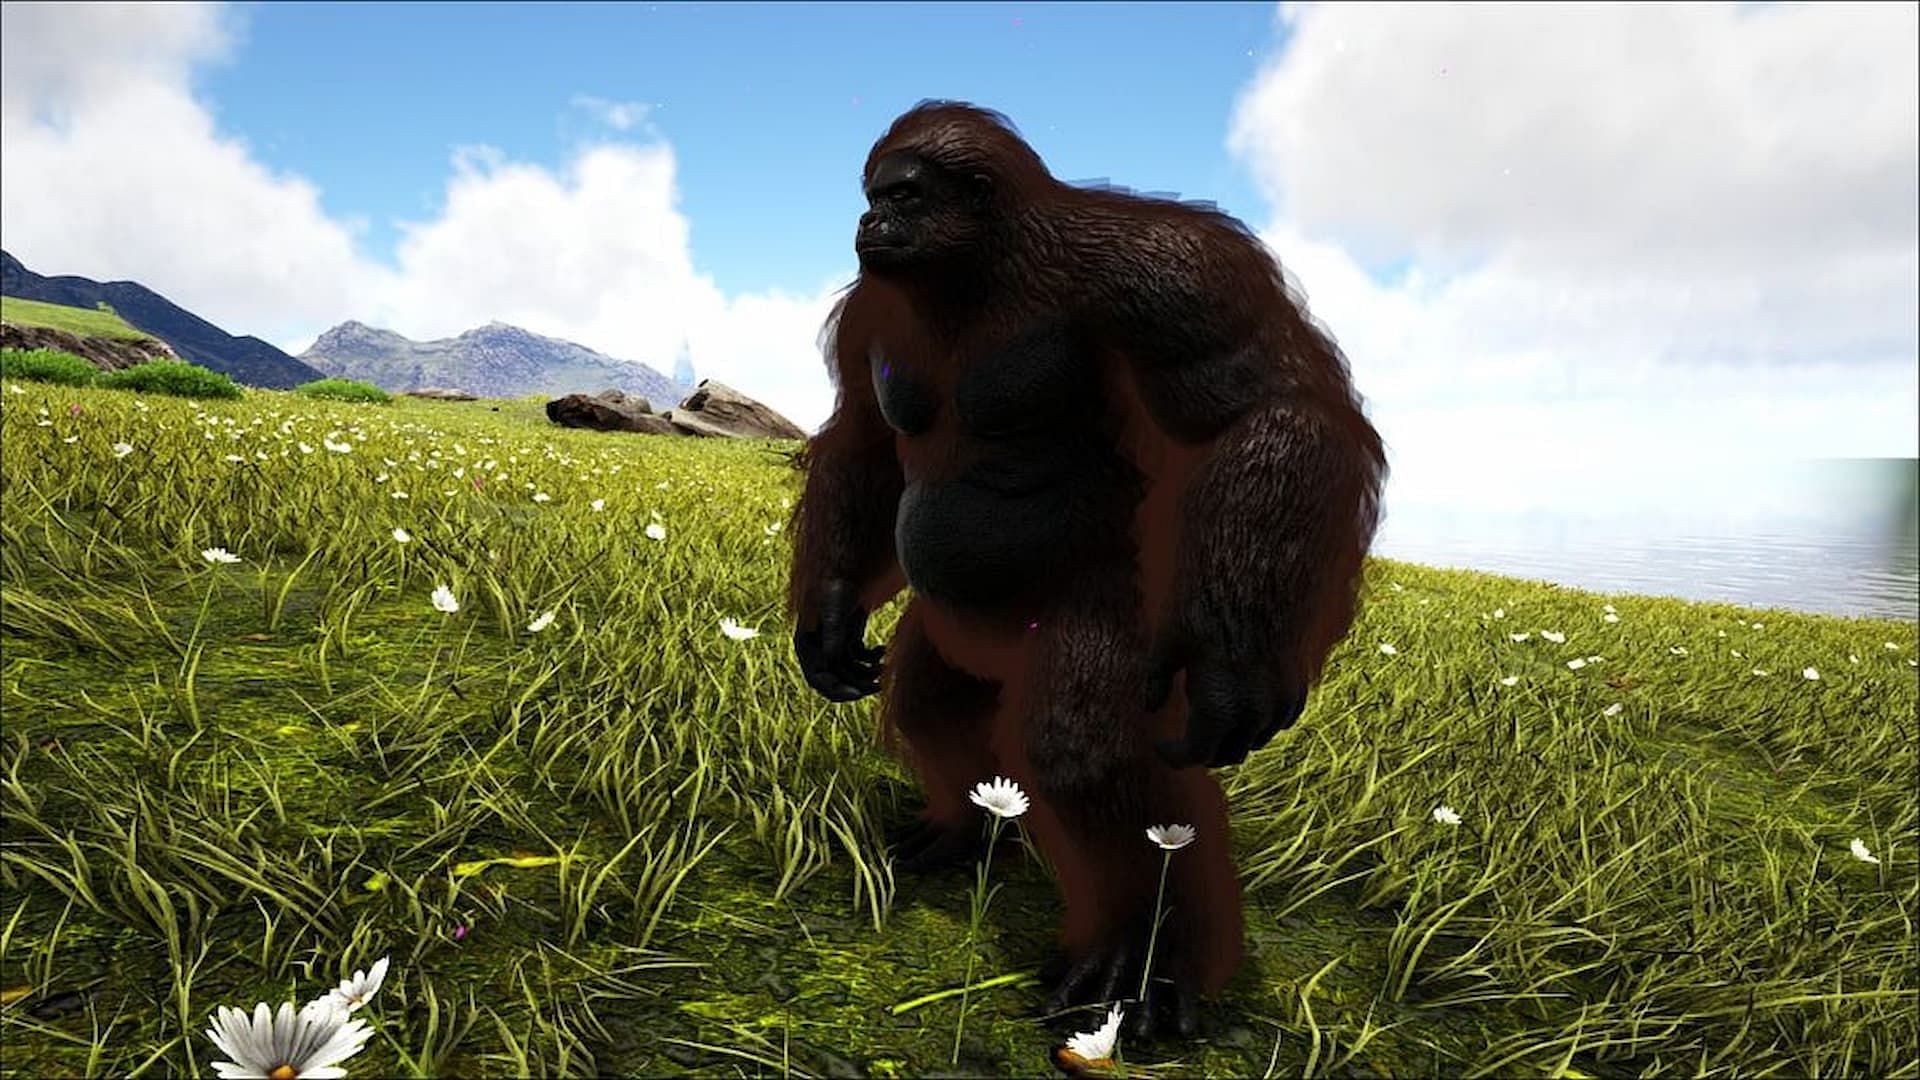 The Gigantopithecus in ARK Survival Ascended